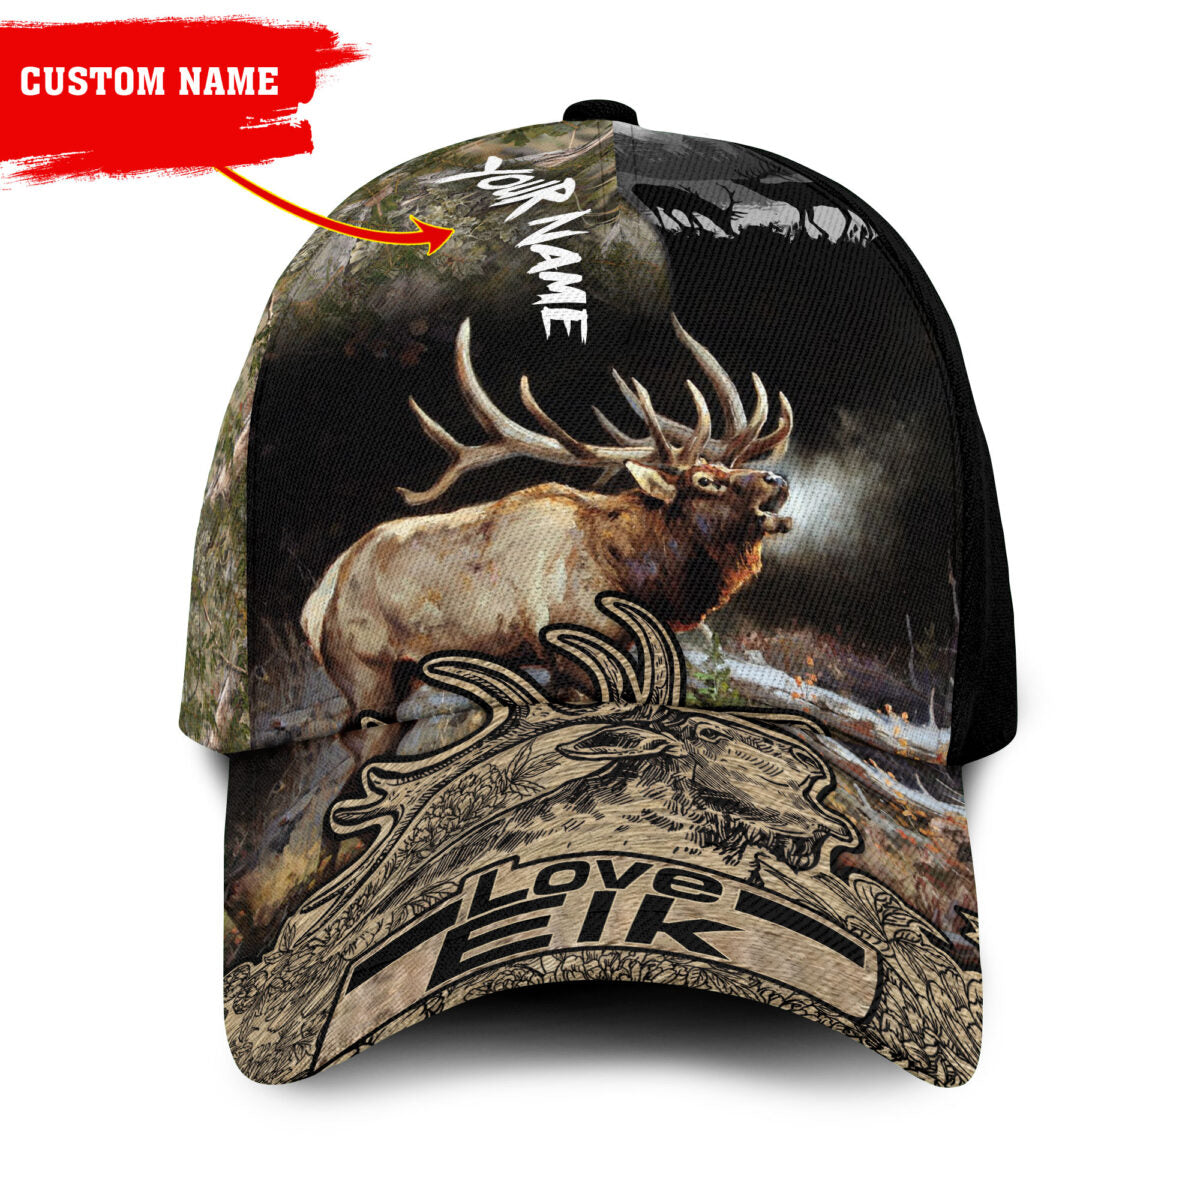 Personalized Deer Hunting Black All Over Printed 3D Cap